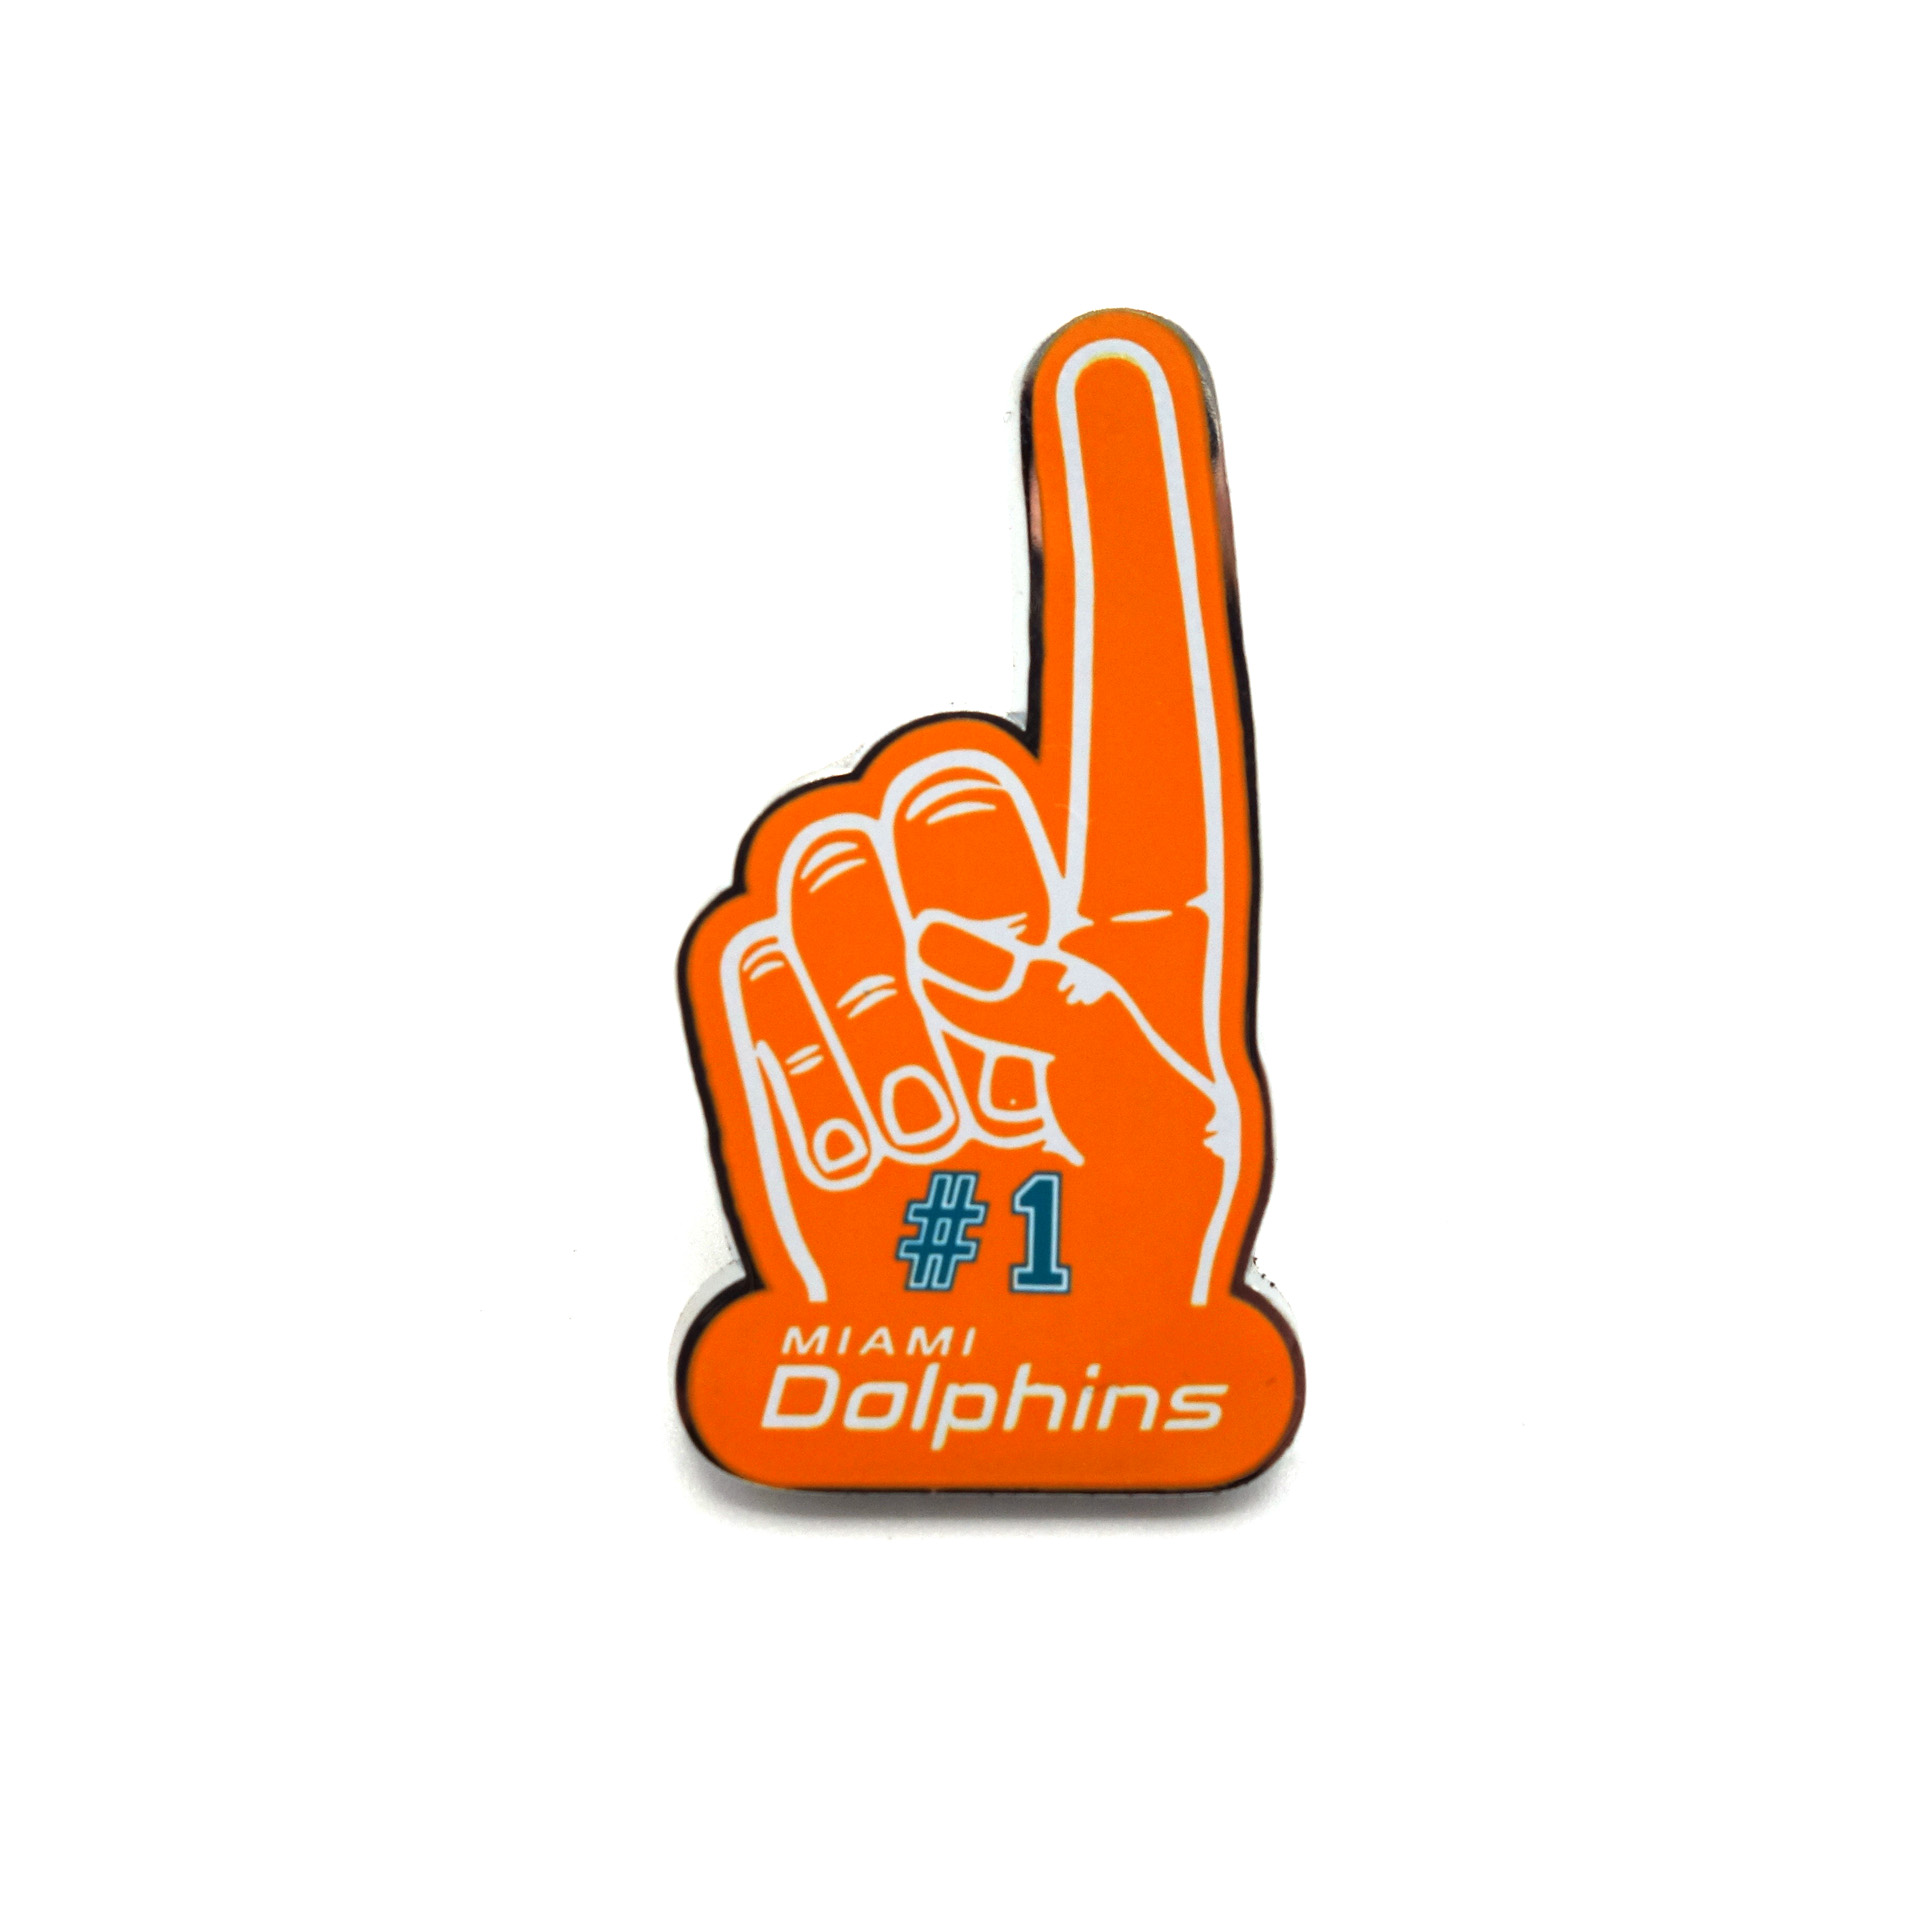 NFL Miami Dolphins Pin Hand Foam Hand